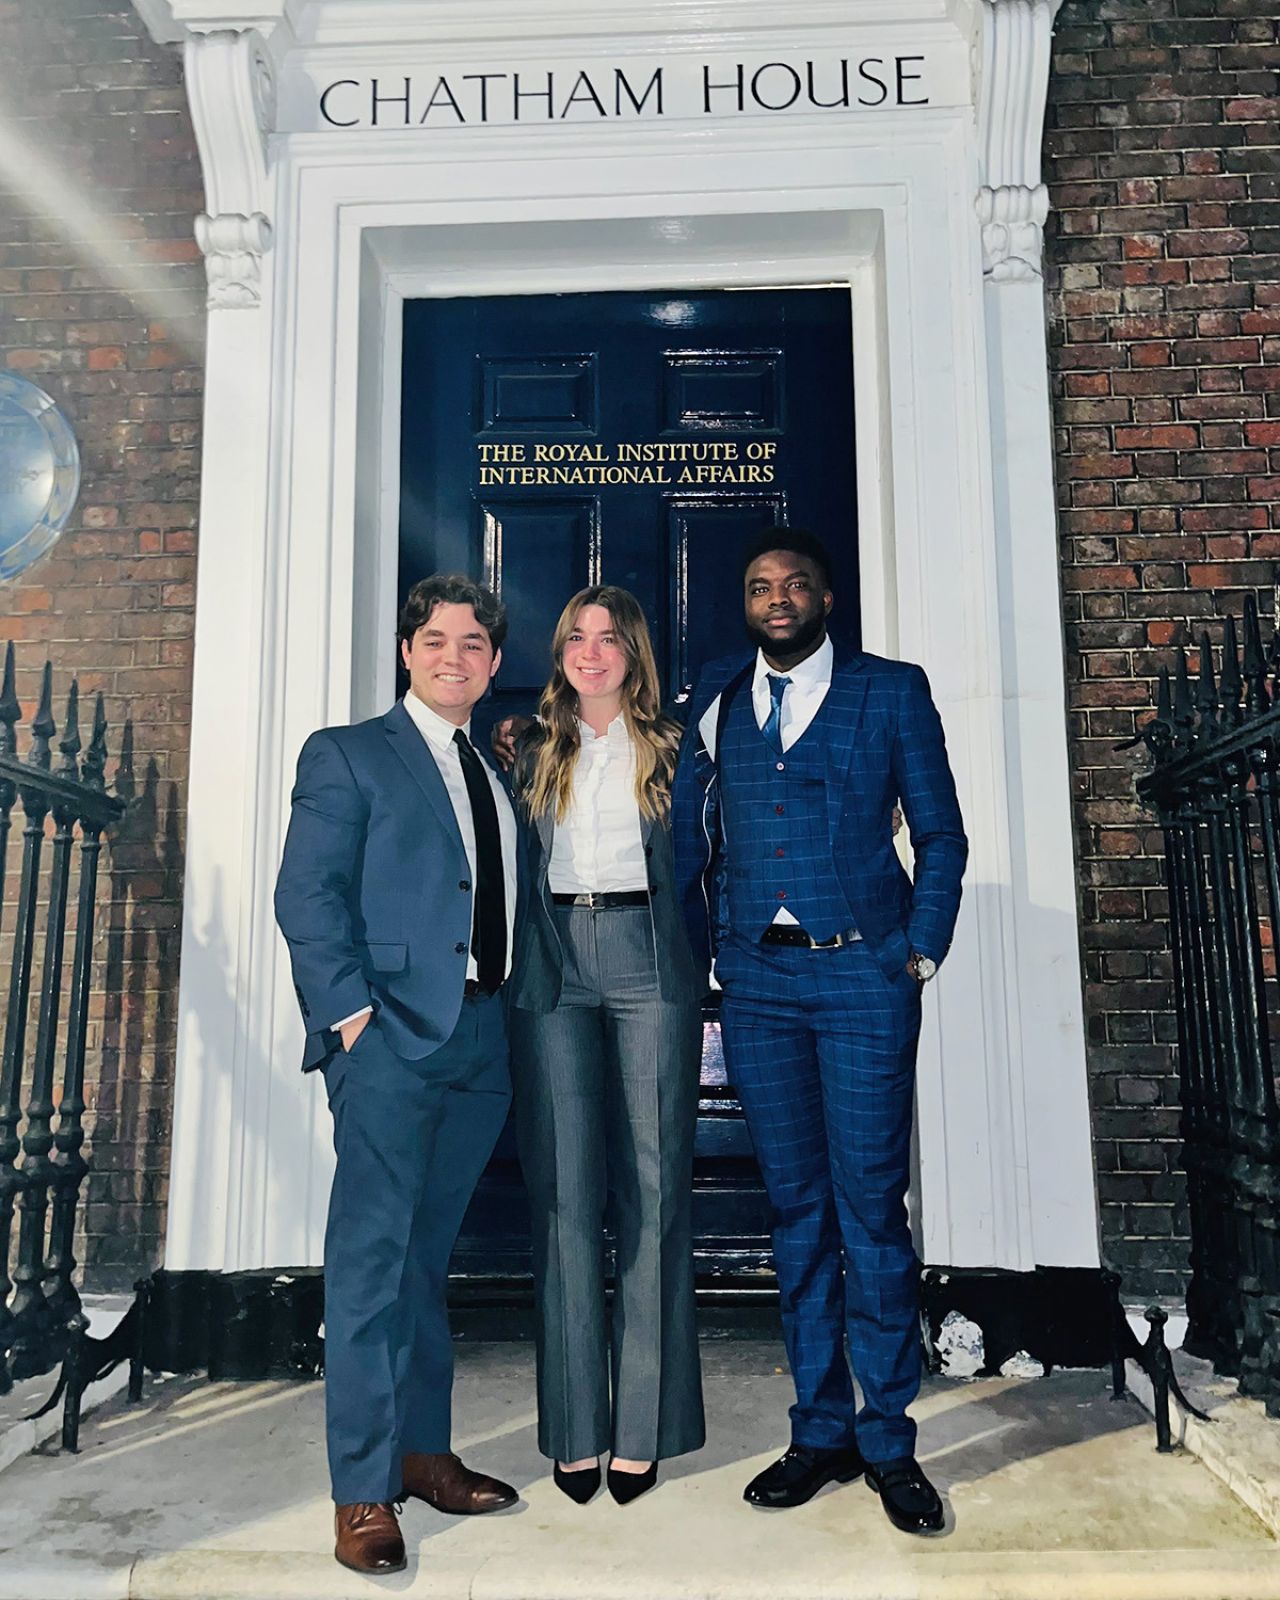 Decuir, Rios, and Mama Amadou outside Chatham House in London.